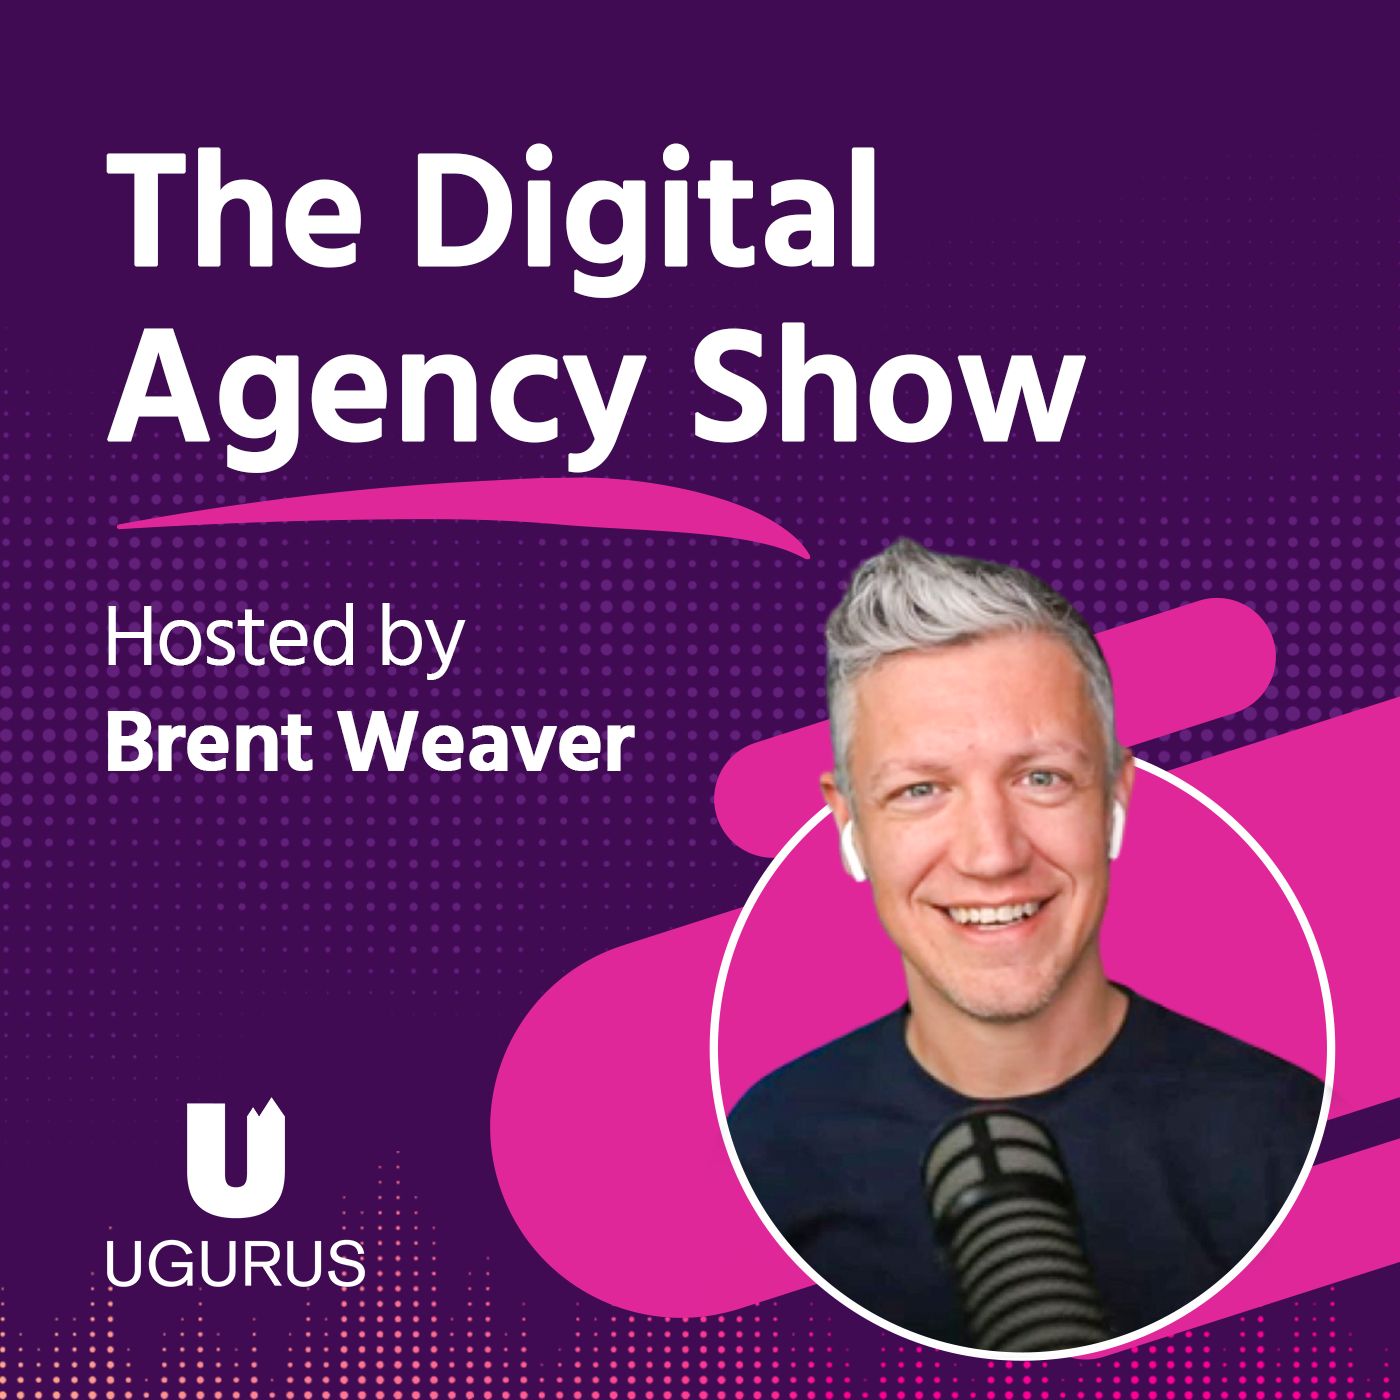 The Digital Agency Show | Helping Agency Owners Transform Their Business Mindset to Increase Prices, Work Less, and Grow Profits